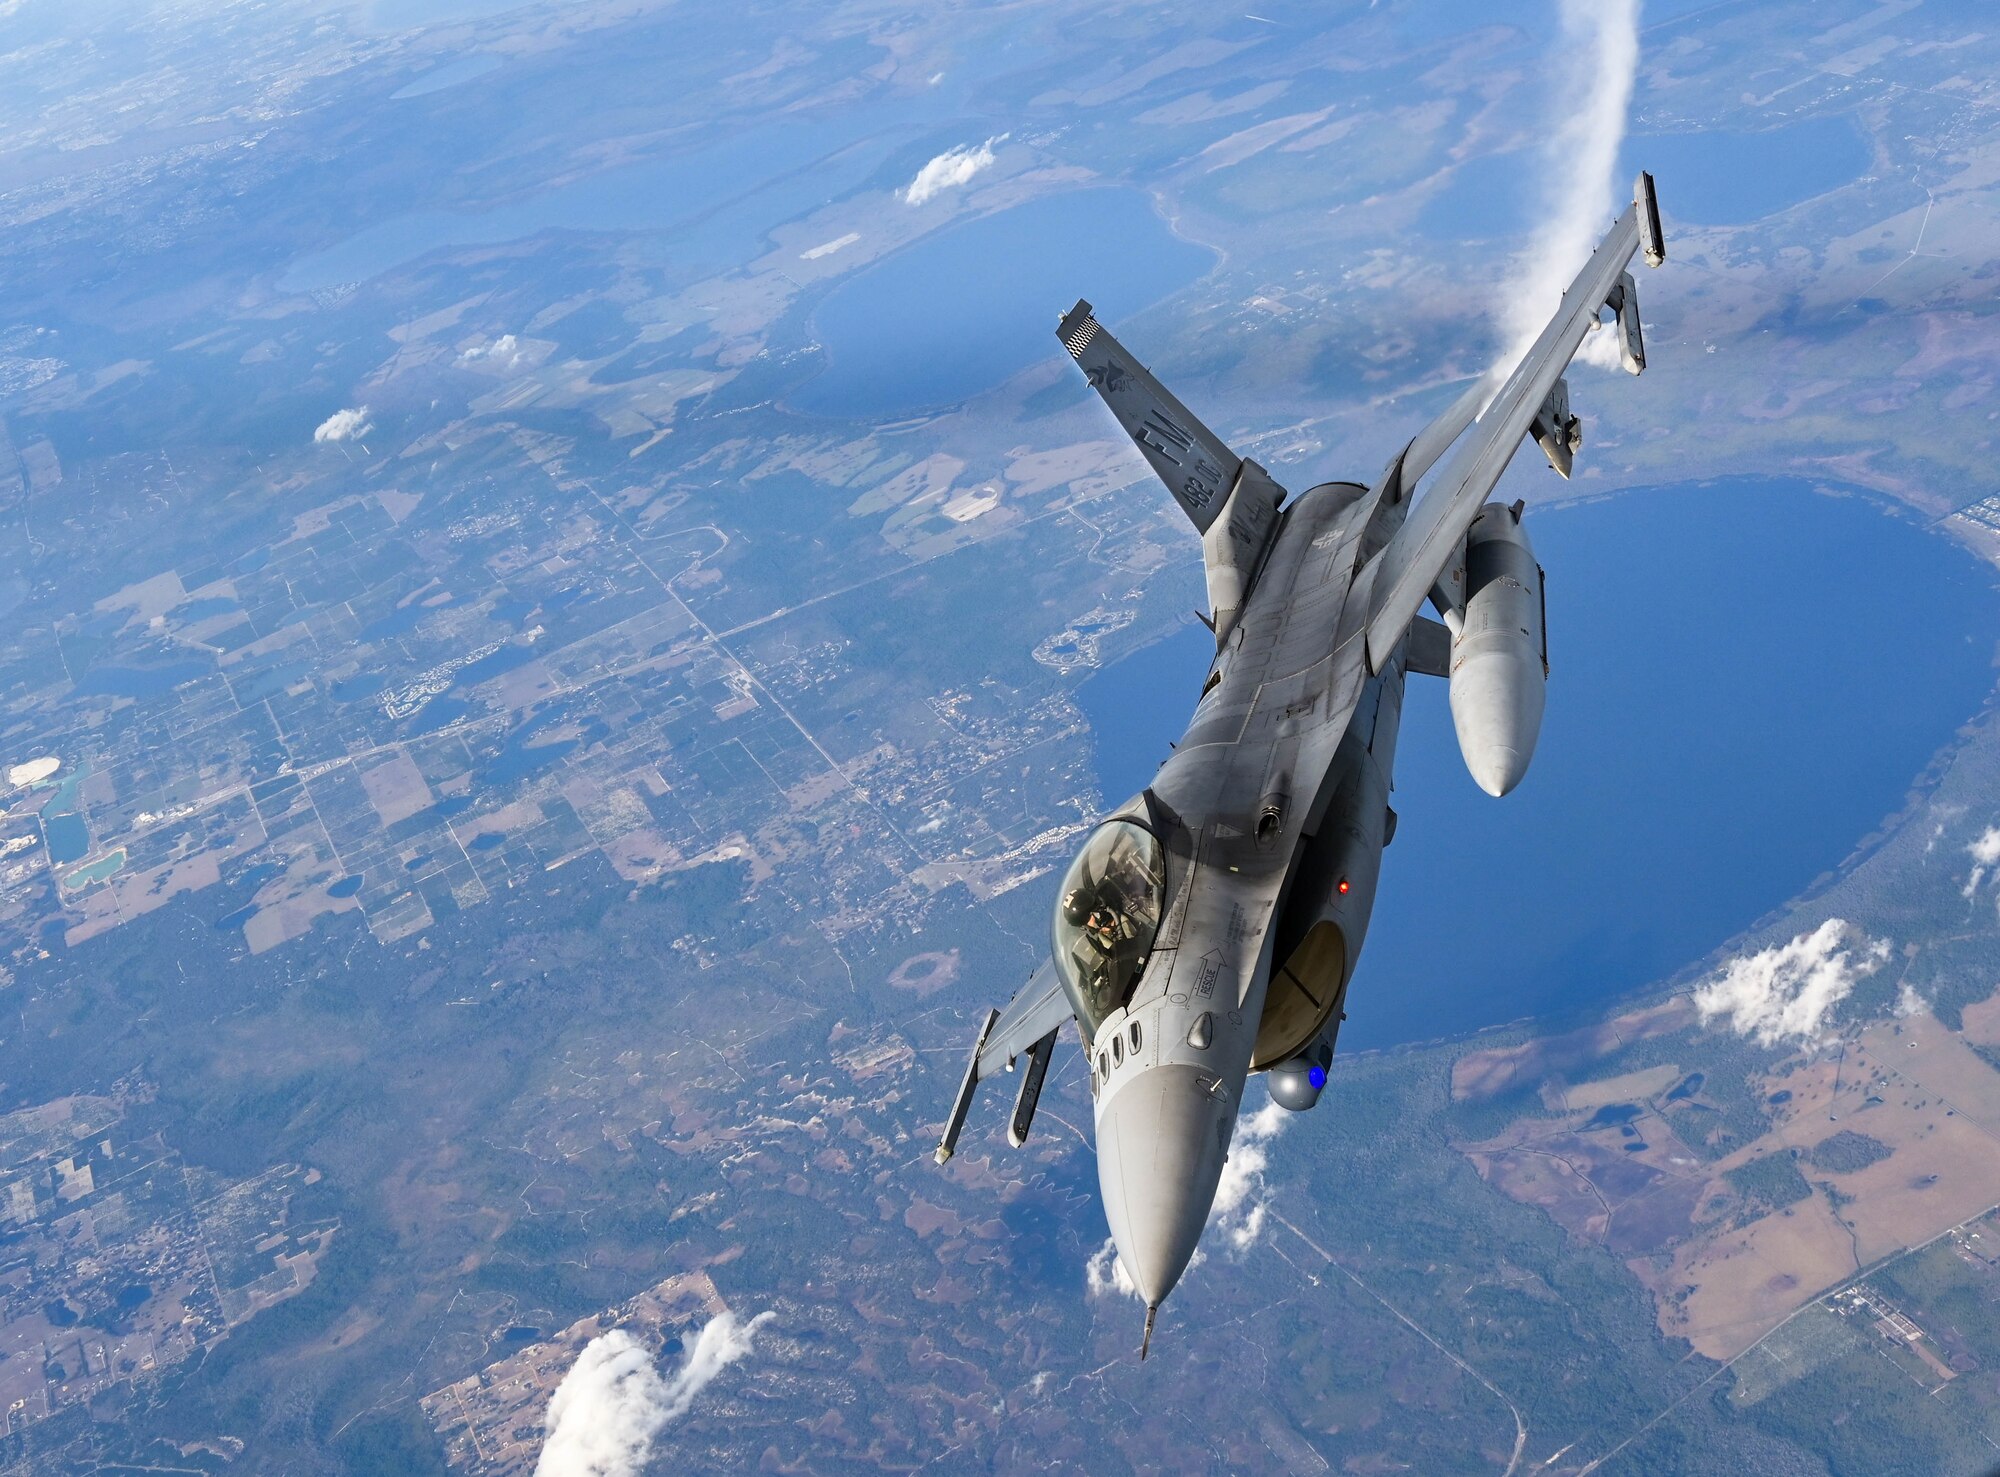 F-16s from the 93rd Fighter Squadron at Homestead Air Reserve Base, Florida, practice aerial refueling with a KC-135 Stratotanker from the 465th Air Refueling Squadron at Tinker Air Force Base, Oklahoma, Jan 27, 2021. This business effort training mission ensured that aircrew on multiple platforms received the necessary upgrade and competency training required to remain fully mission capable. (U.S. Air Force photo by Senior Airman Mary Begy)